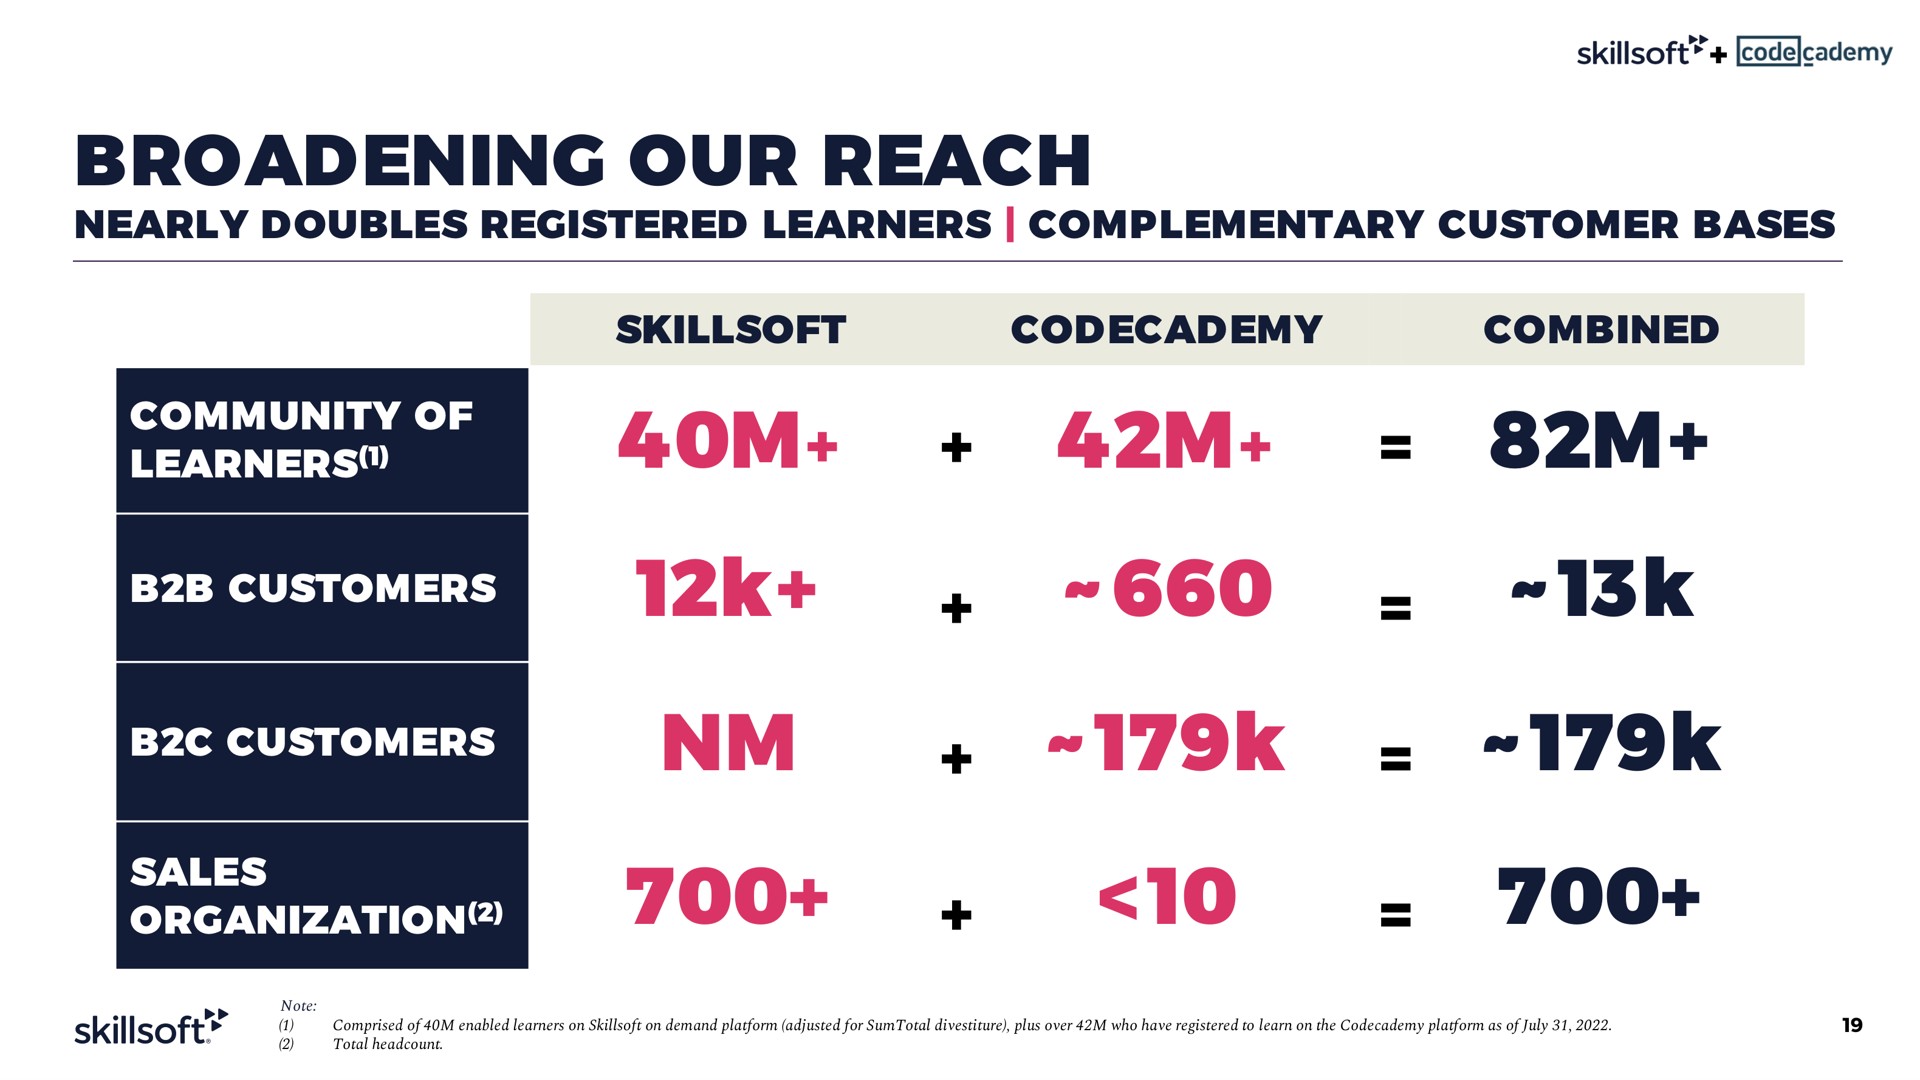 broadening our reach nearly doubles registered learners complementary customer bases customers ere learners customers combined | Skillsoft